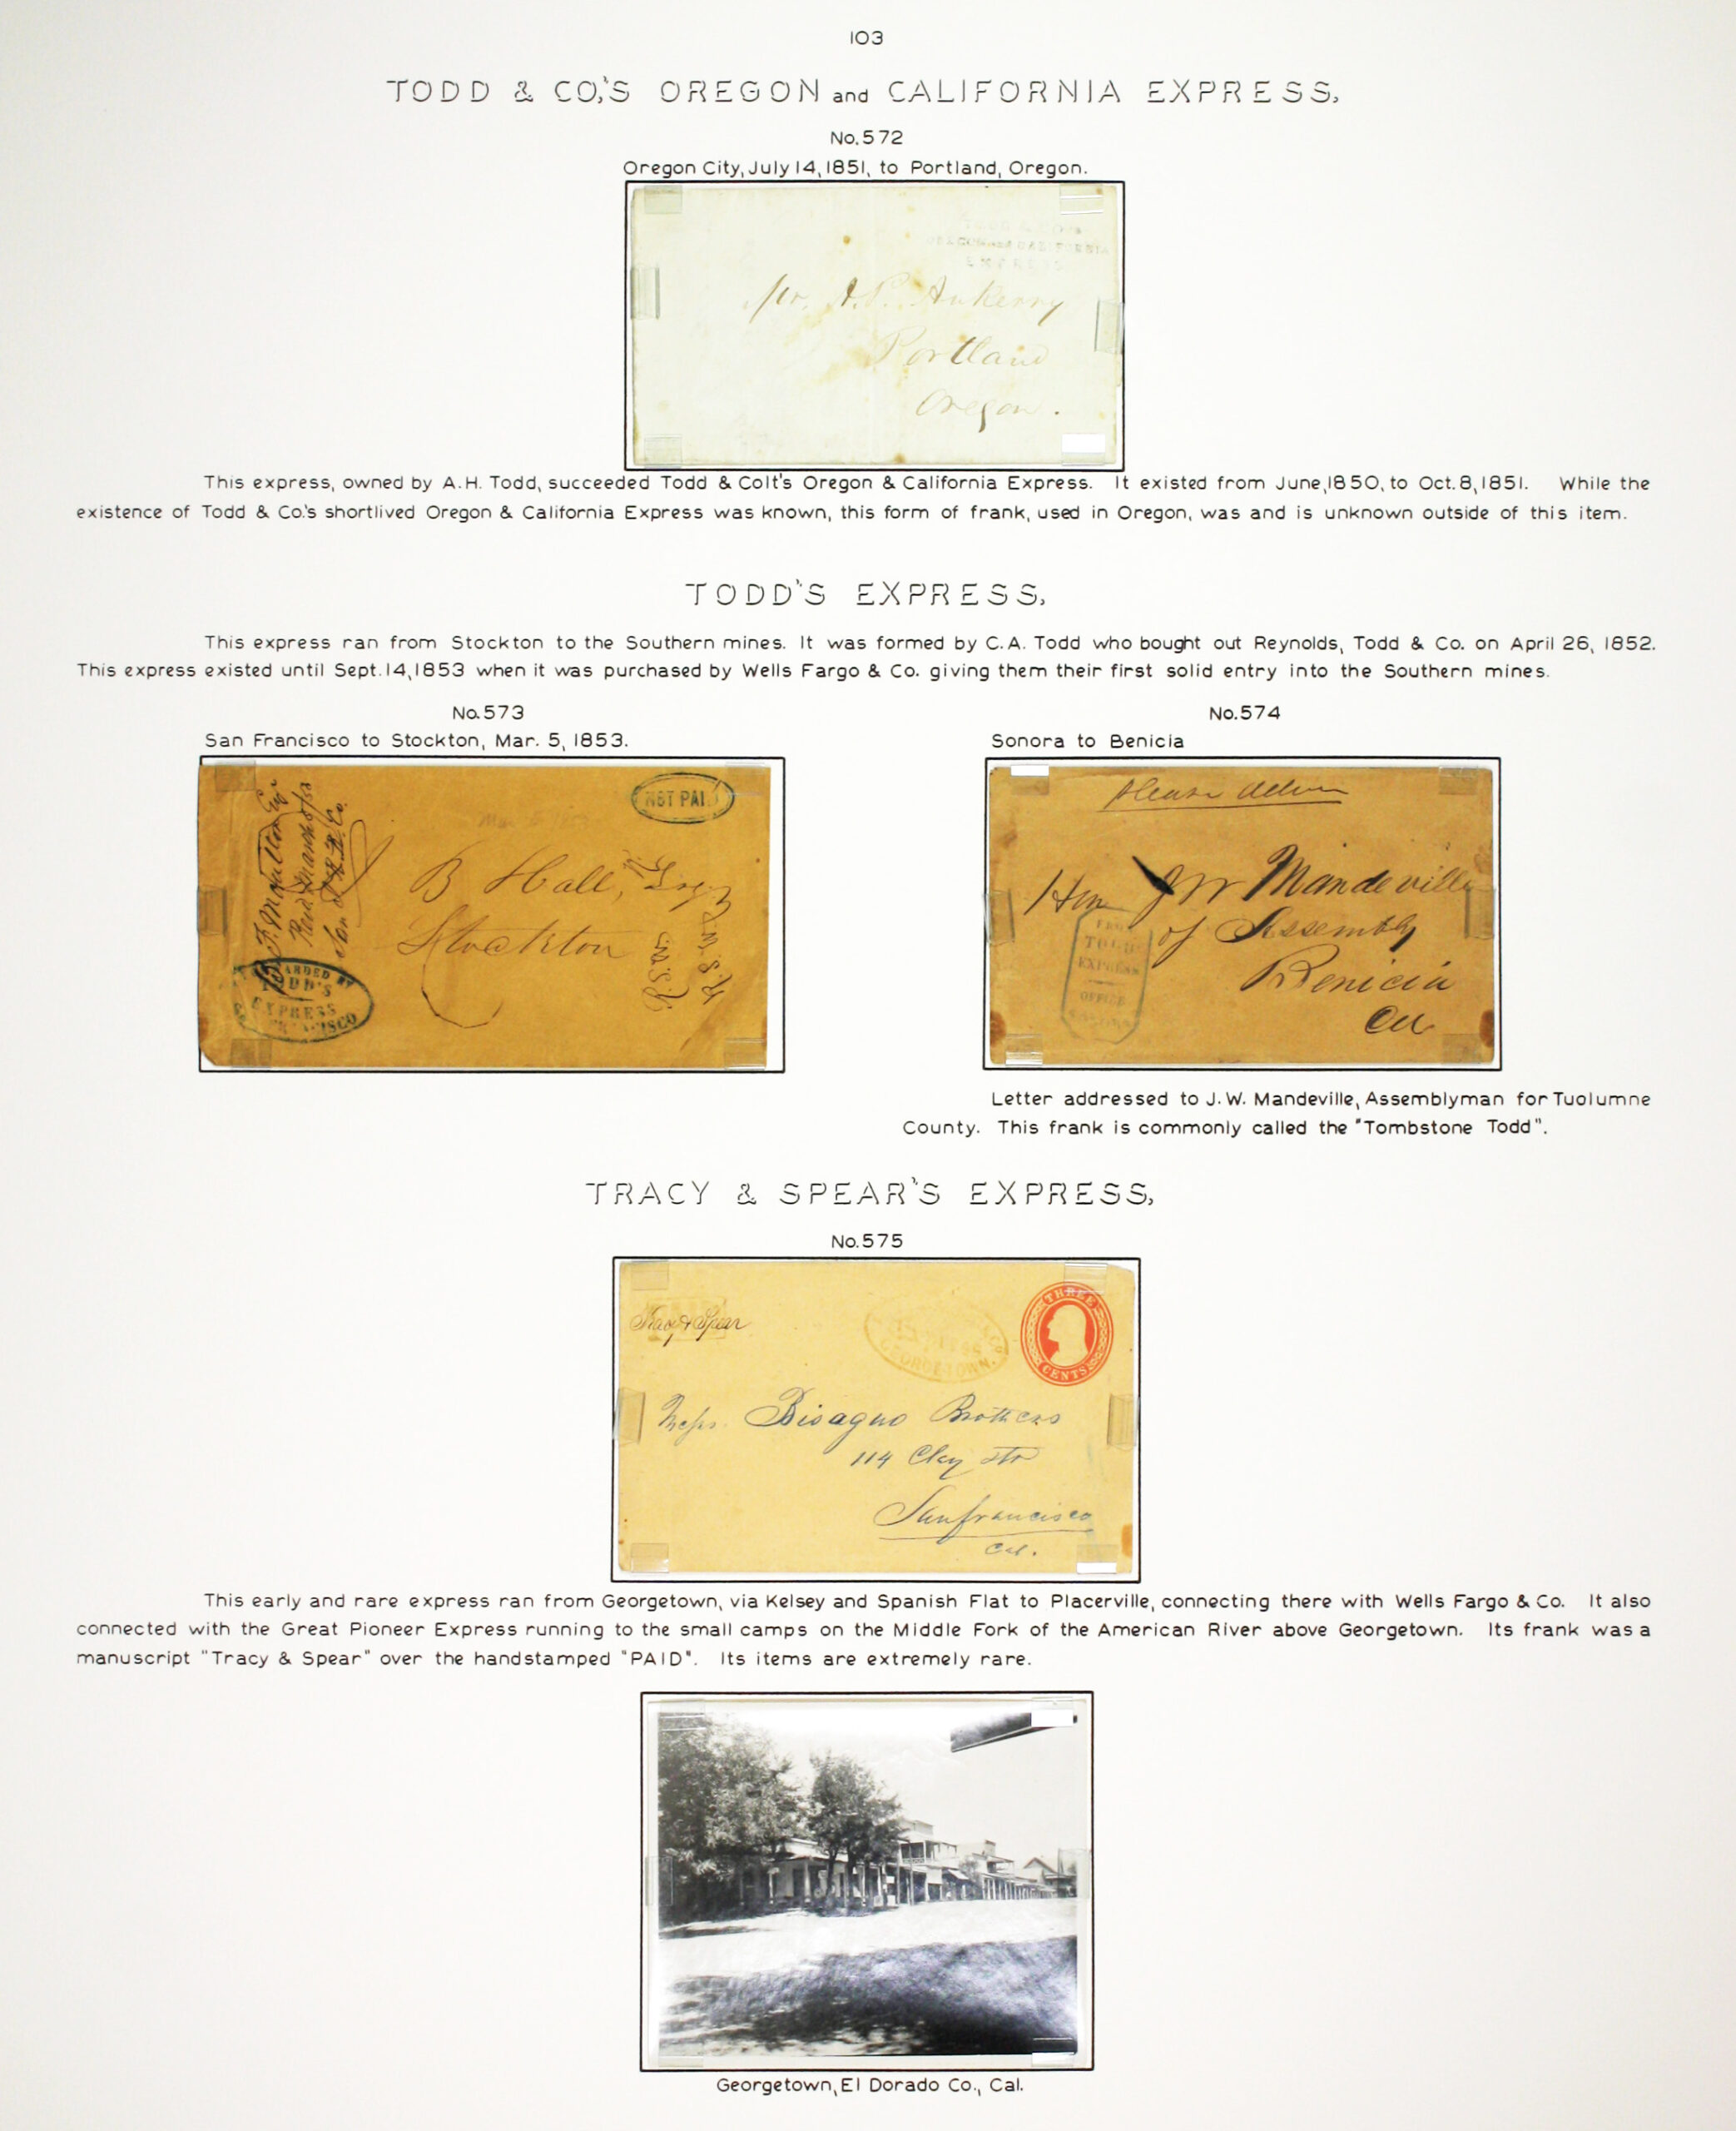 Historic exhibit Panel #103 featuring letter covers and a photograph. Long descriptions are available as page content. Image link will enlarge image.